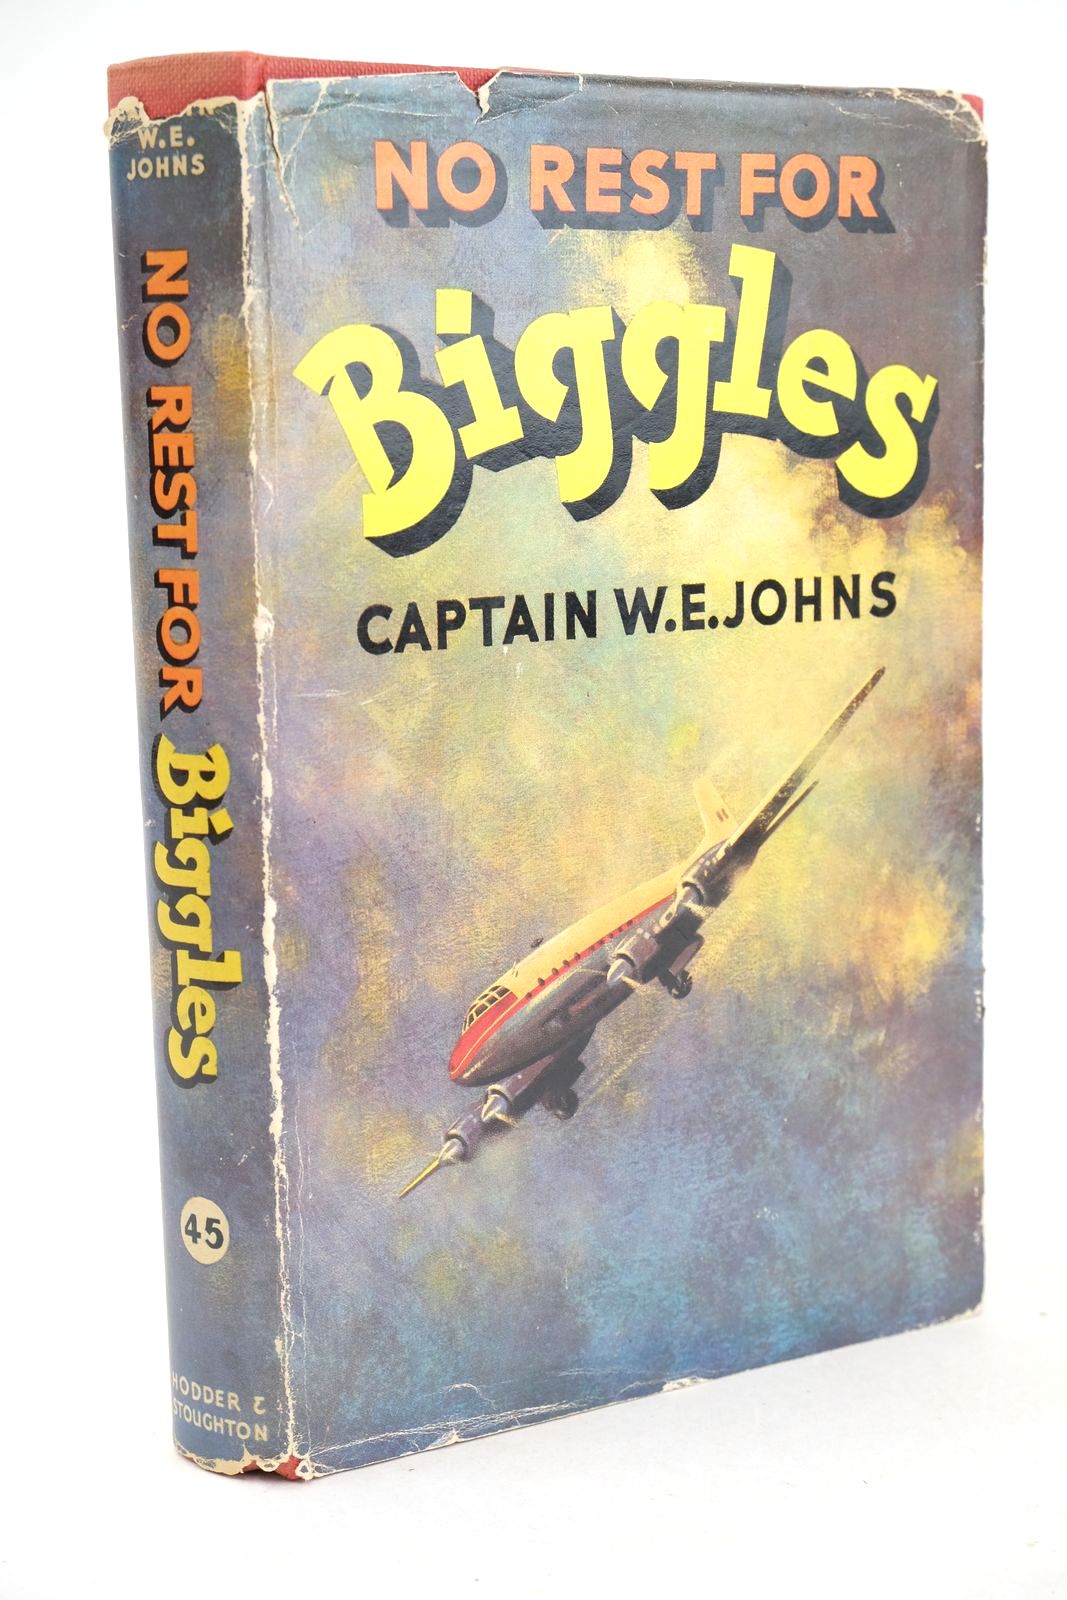 Photo of NO REST FOR BIGGLES written by Johns, W.E. illustrated by Stead,  published by Hodder &amp; Stoughton (STOCK CODE: 1325770)  for sale by Stella & Rose's Books